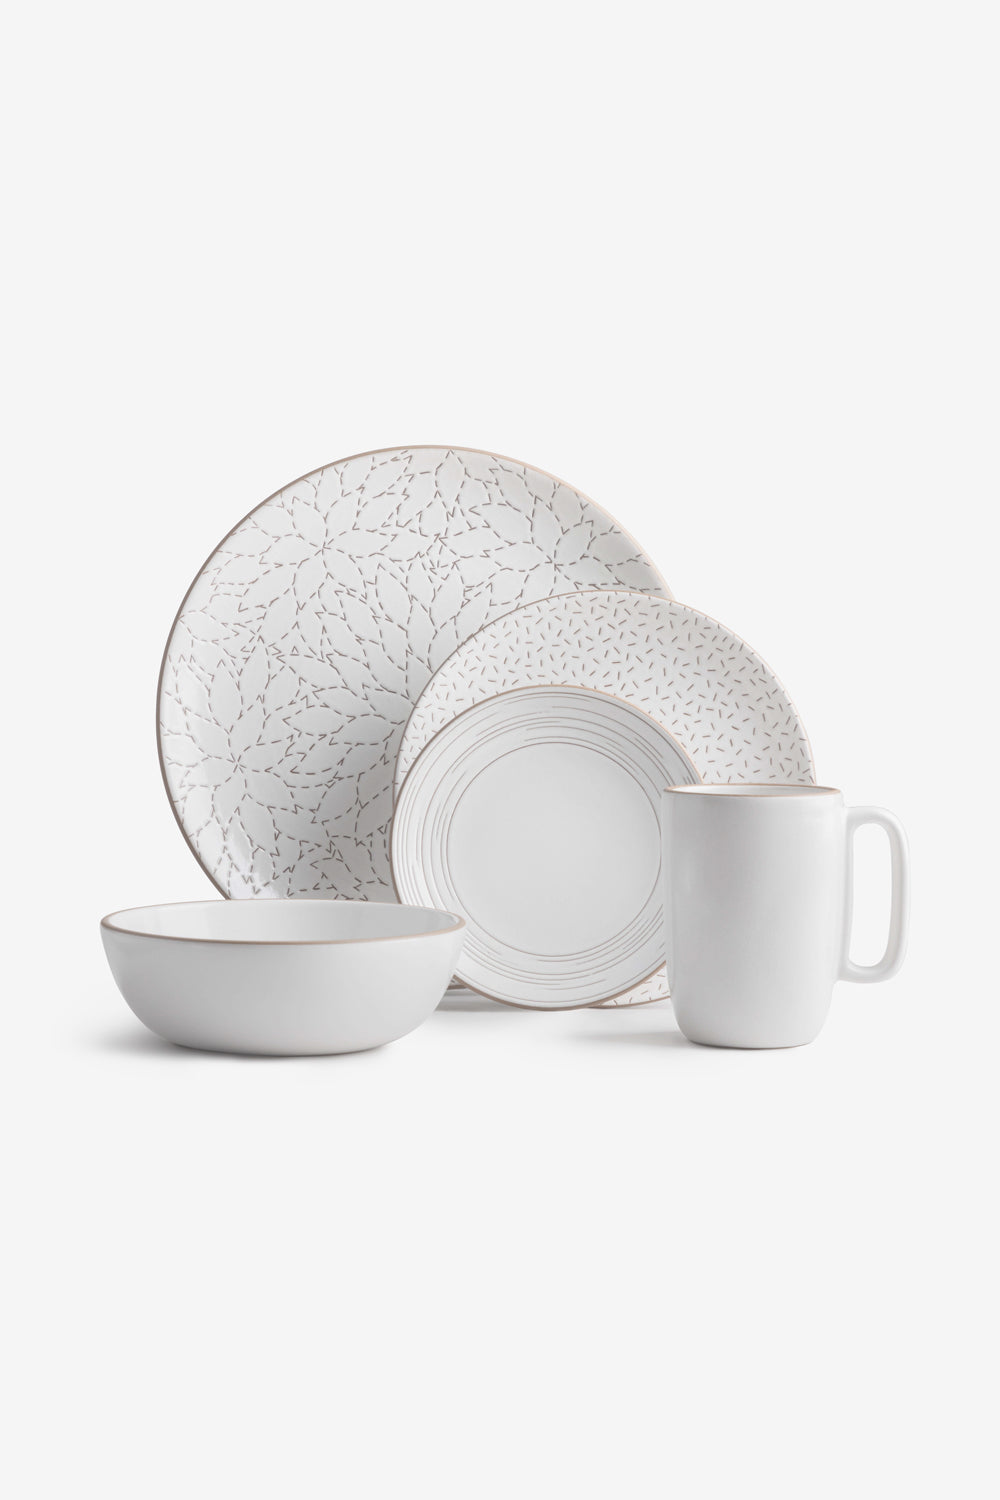 Alabama Chanin Magnolia Etched Dinnerware Set in Opaque White Hand Crafted from Alabama Chanin and Heath Ceramics Collaboration